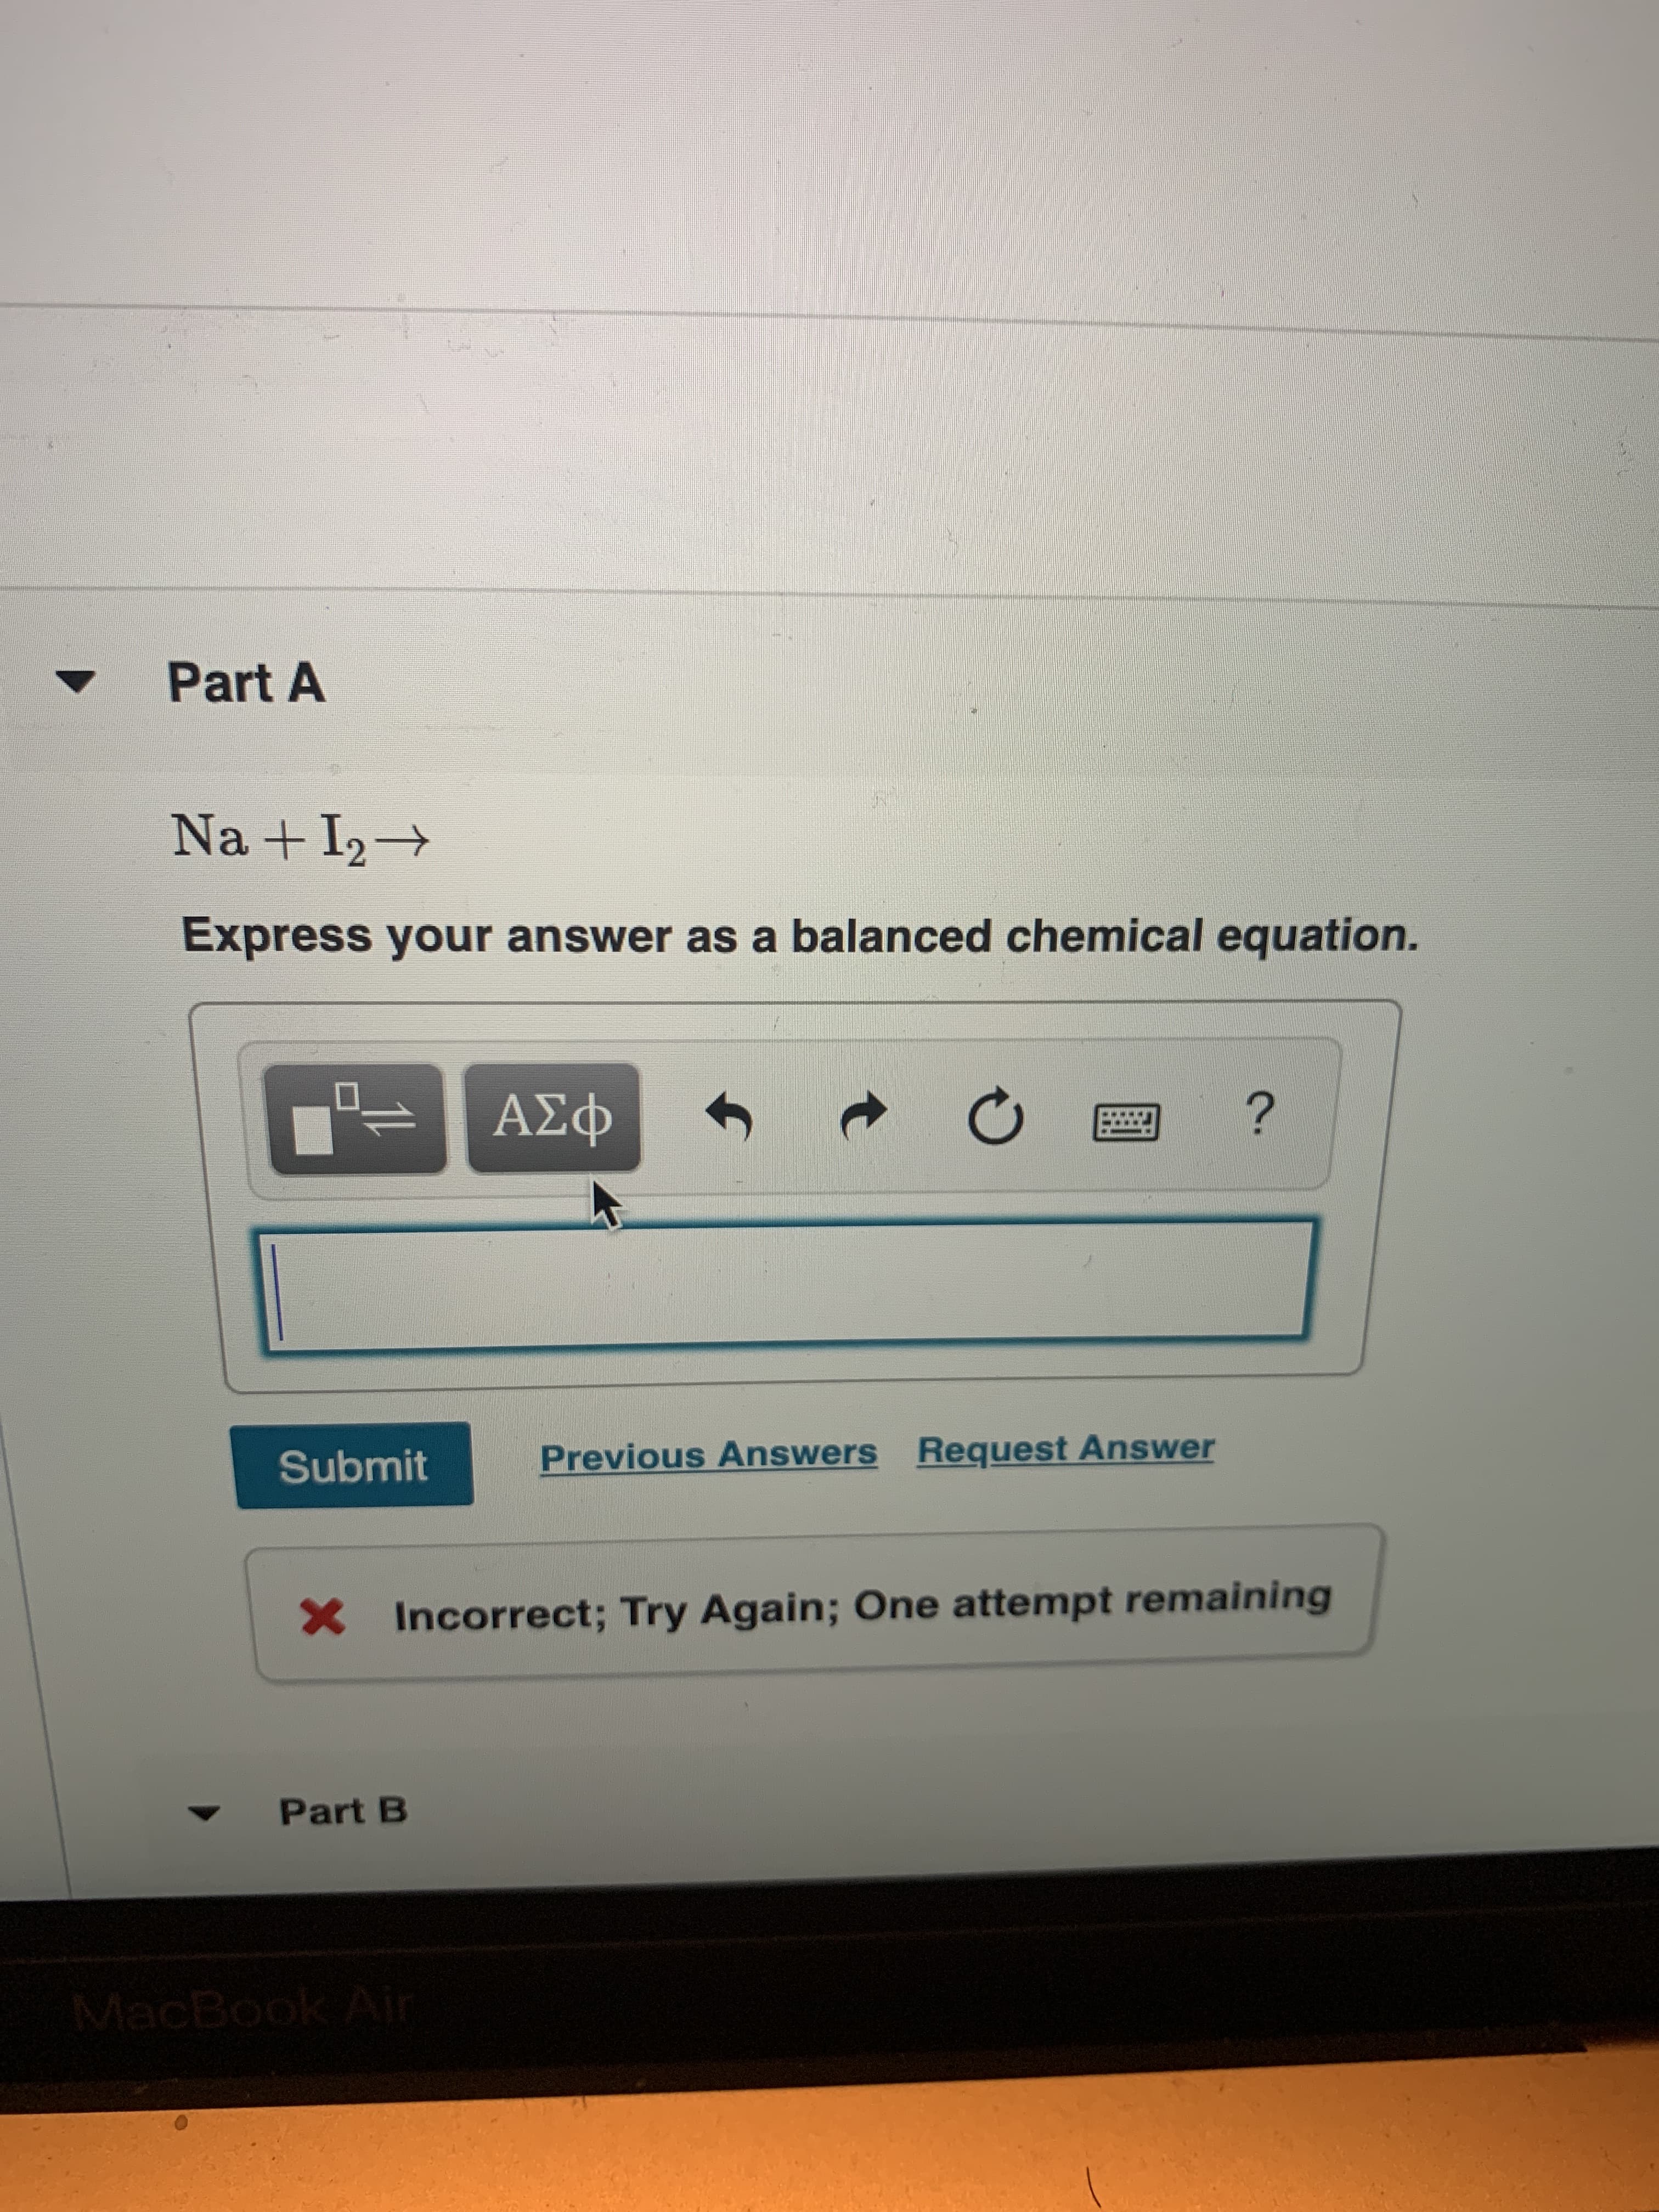 Part A
Na +I2
Express your answer as a balanced chemical equation.
?
ΑΣφ
Request Answer
Previous Answers
Submit
X
Incorrect; Try Again; One attempt remaining
Part B
MacBook Ai
t
